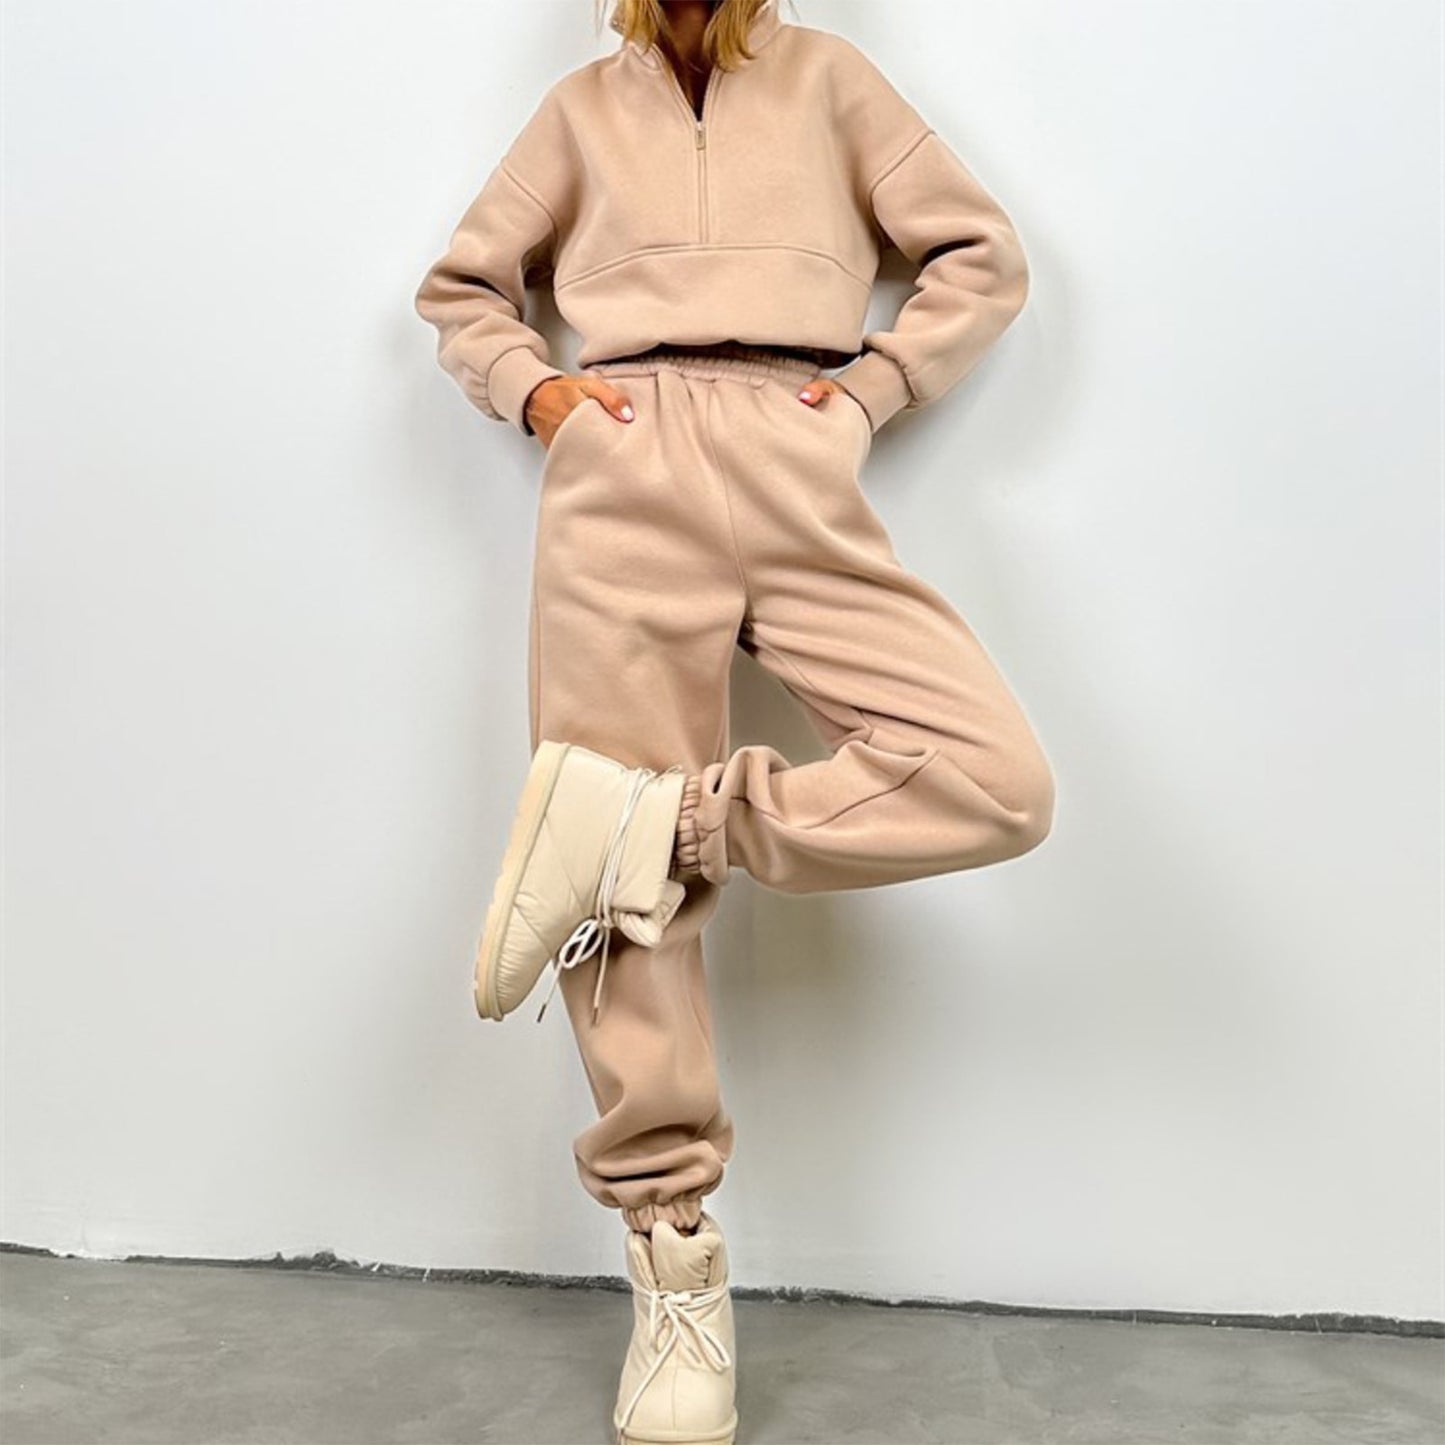 Women's Autumn/Winter 2 Piece Sweatshirt/Solid Color Pullover + Sports Casual Pants